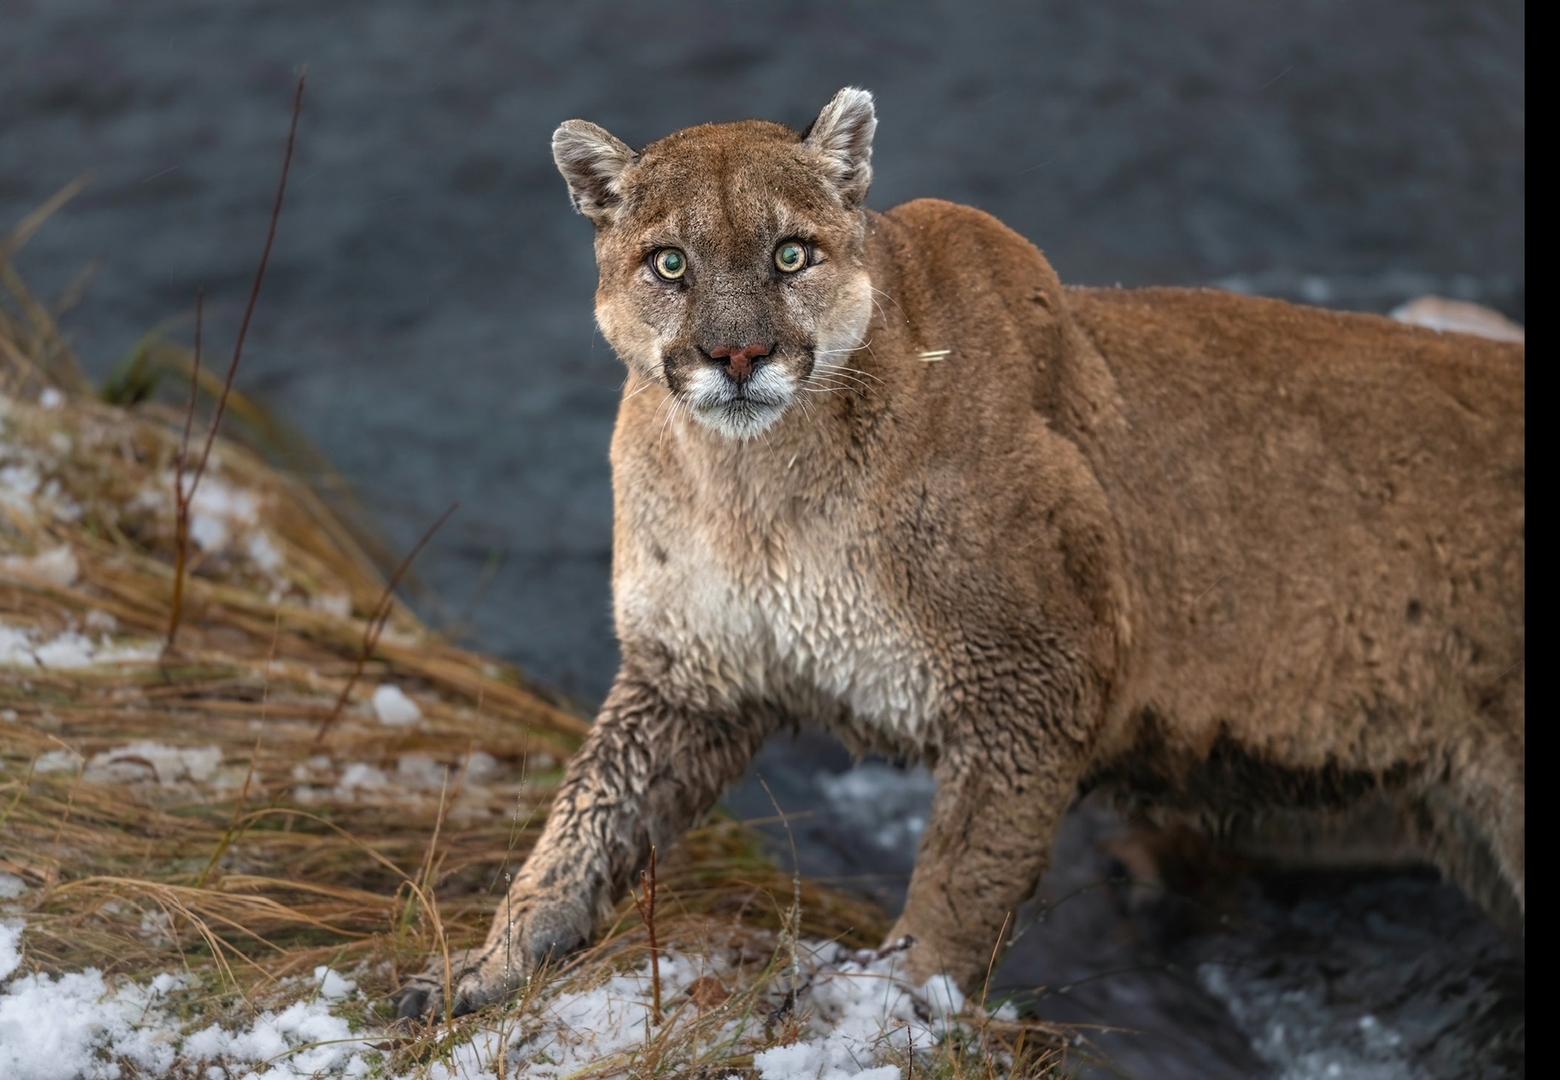 A mountain lion rises from a stream as he attempts to cache an elk kill under the water. "I tracked this cat the day before and photographed him at sunrise the following morning," says photographer Savannah Rose. "We made eye contact for this brief moment before he settled down nearby to groom his wet fur." Photo by Savannah Rose